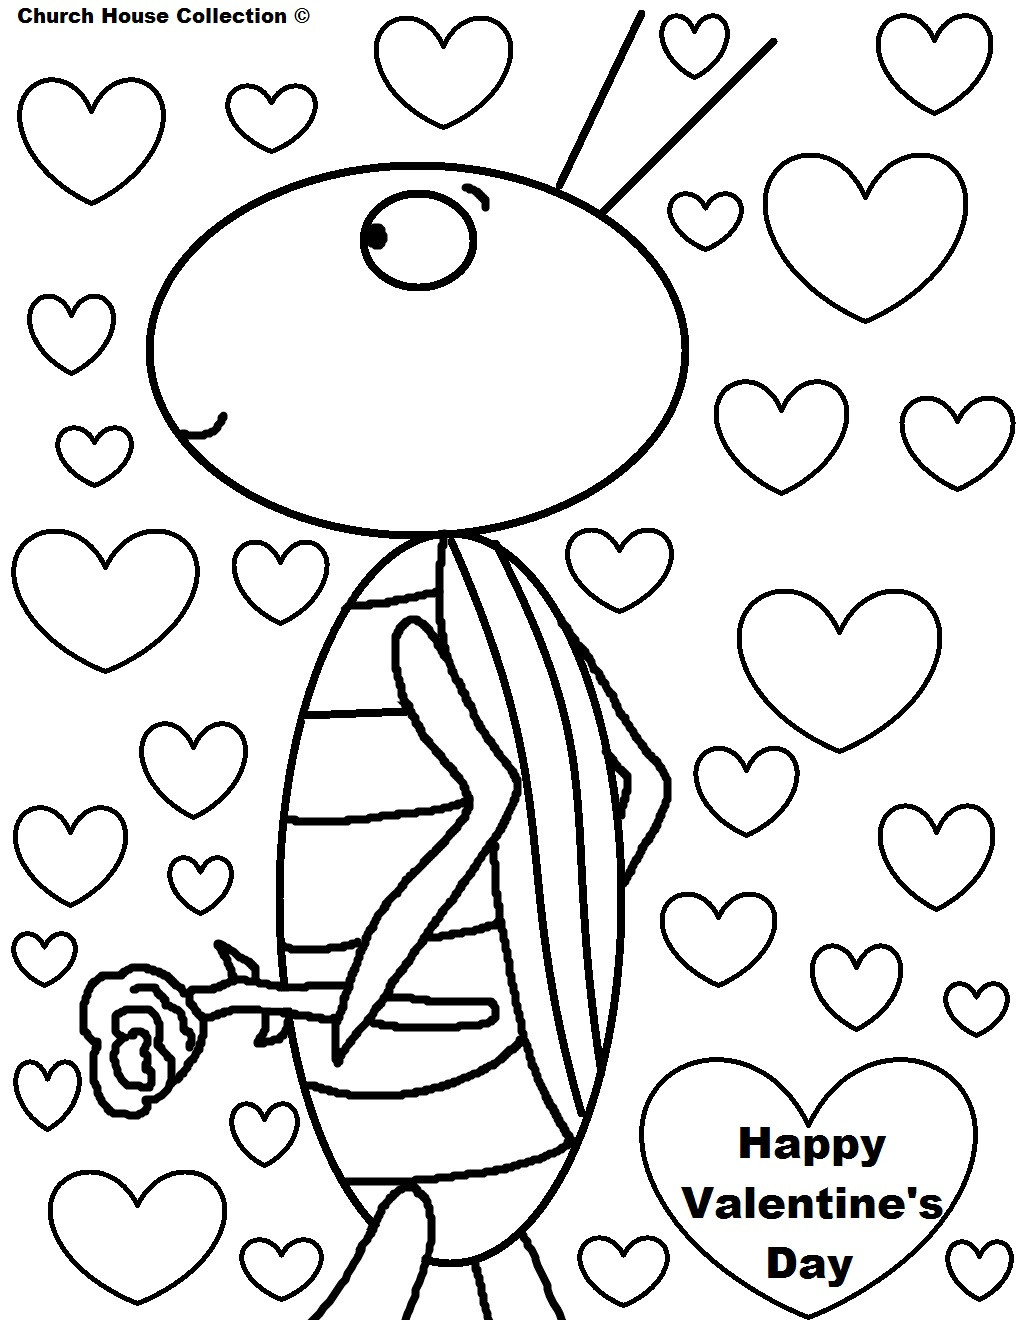 Valentines Day Coloring Pages For Kids
 Church House Collection Blog Valentine s Day Coloring